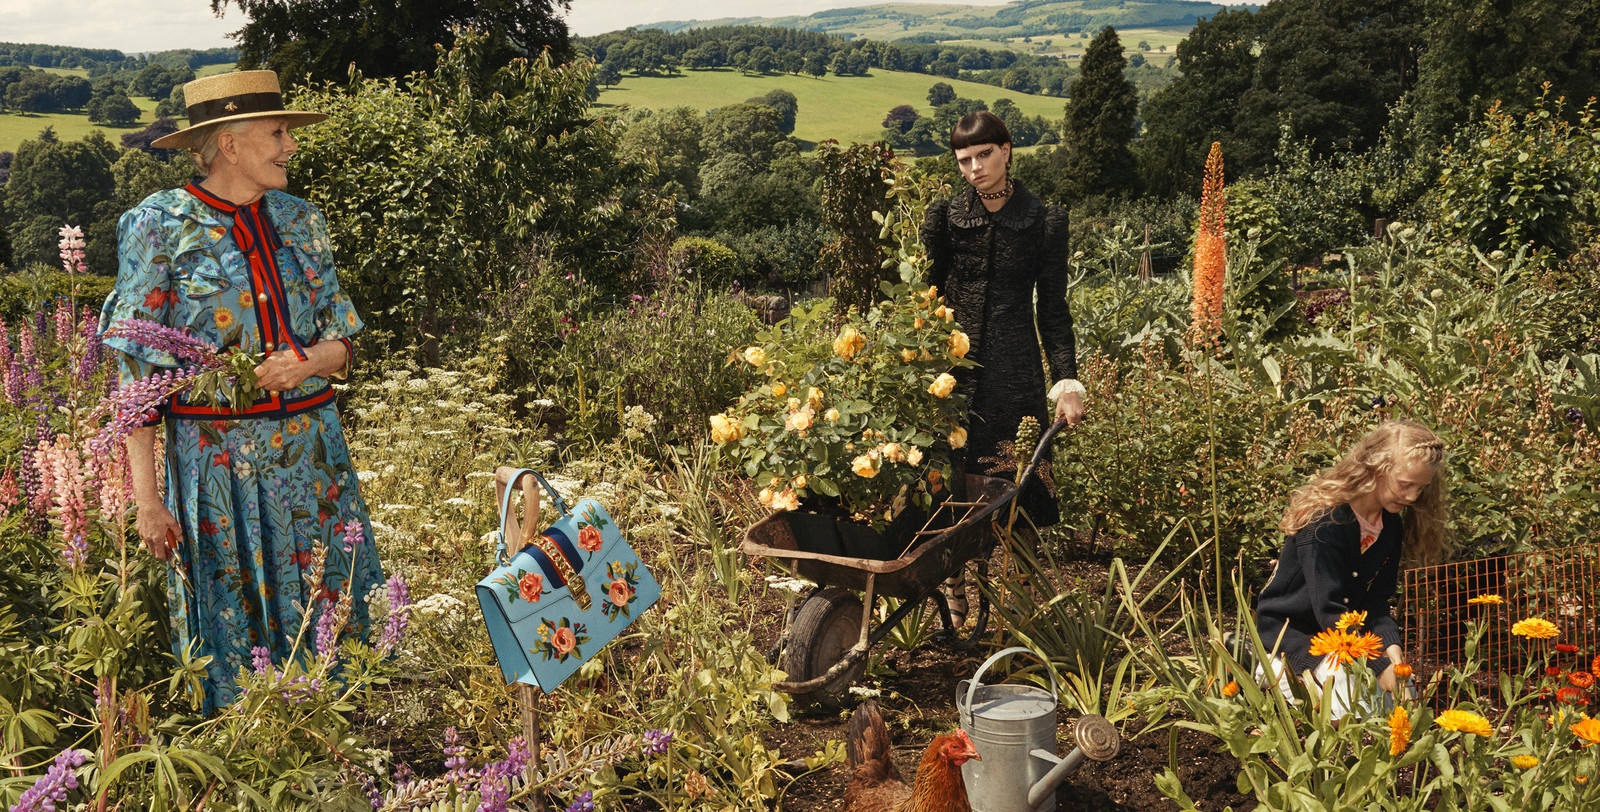 Gucci attempted to attract users with challenges, such as the Unexpected Style Leader and Gucci Eden Garden Challenge hashtag challenge and competitive campaign. Image: Gucci